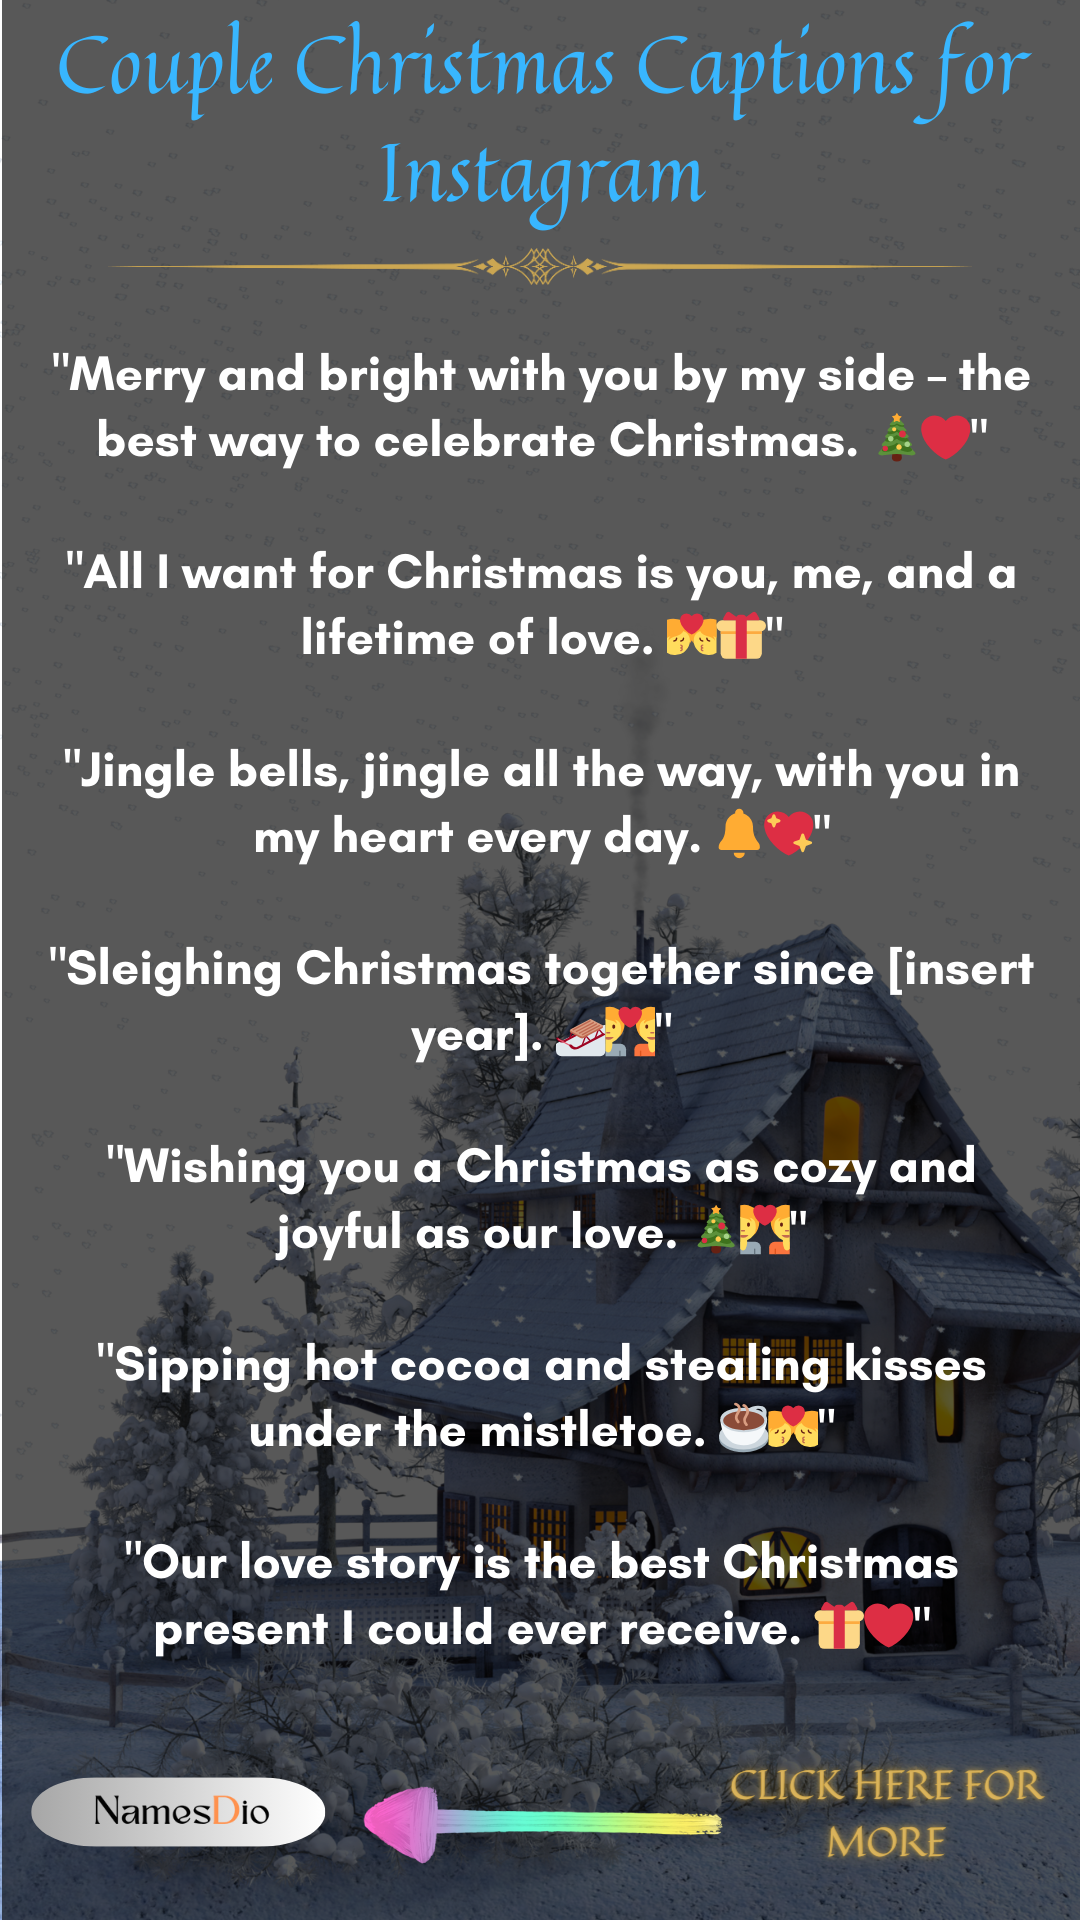 Couple-Christmas-Captions-for-Instagram